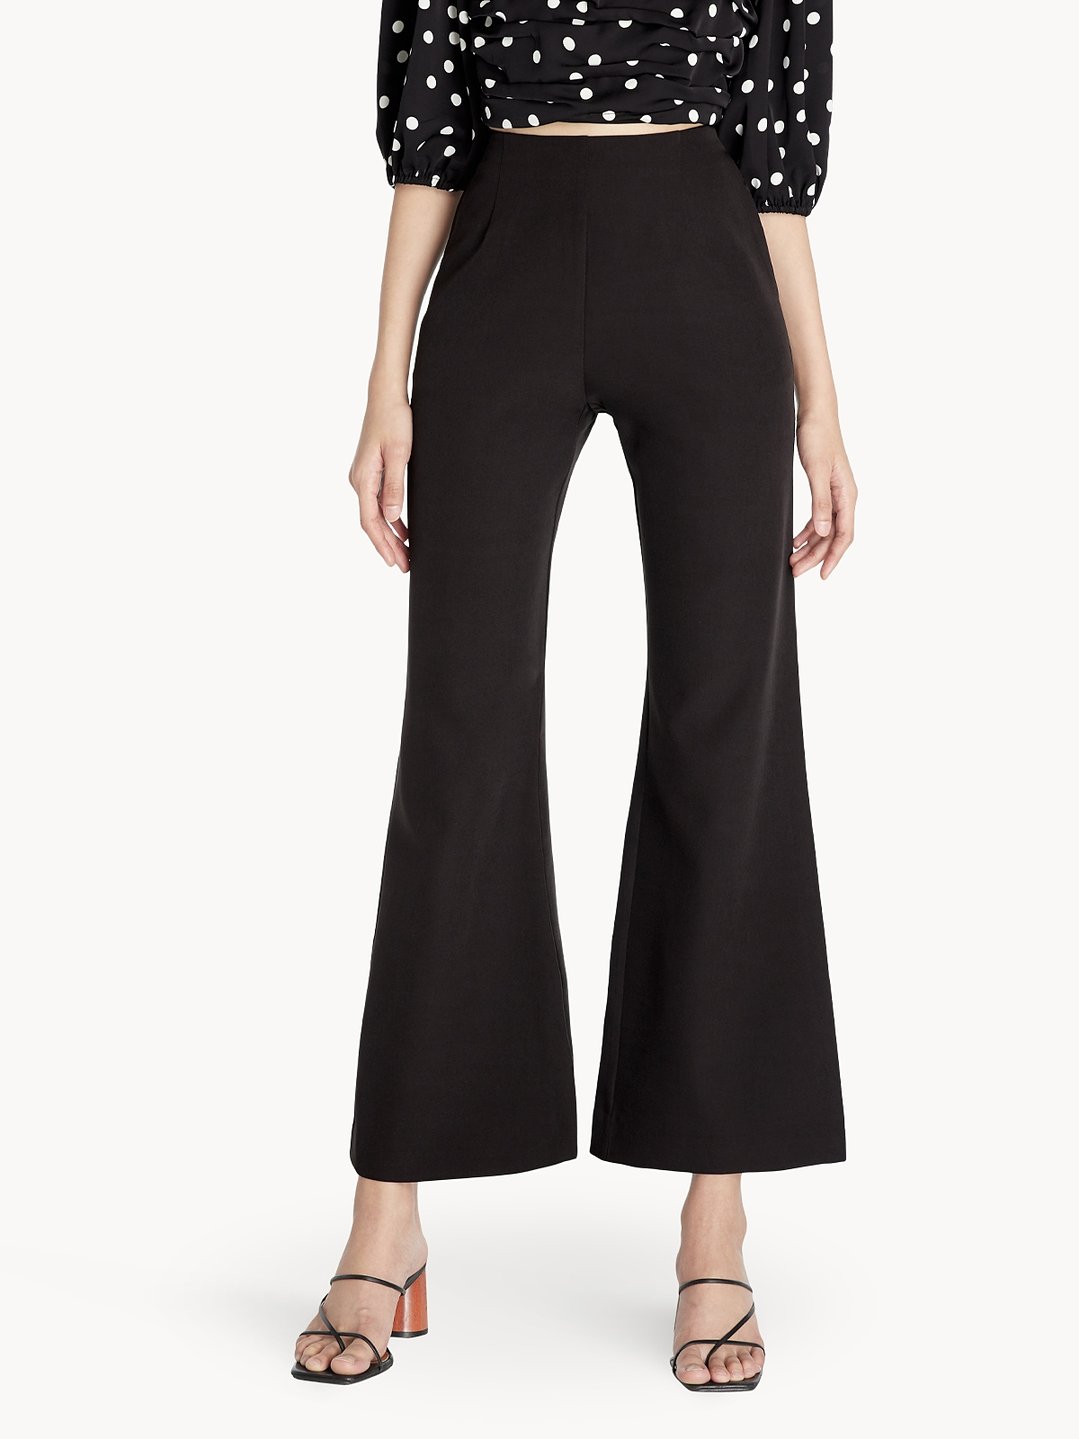 Assorted Brands Pitch Black High Waist Flare Pants, Women's Fashion,  Muslimah Fashion, Bottoms on Carousell